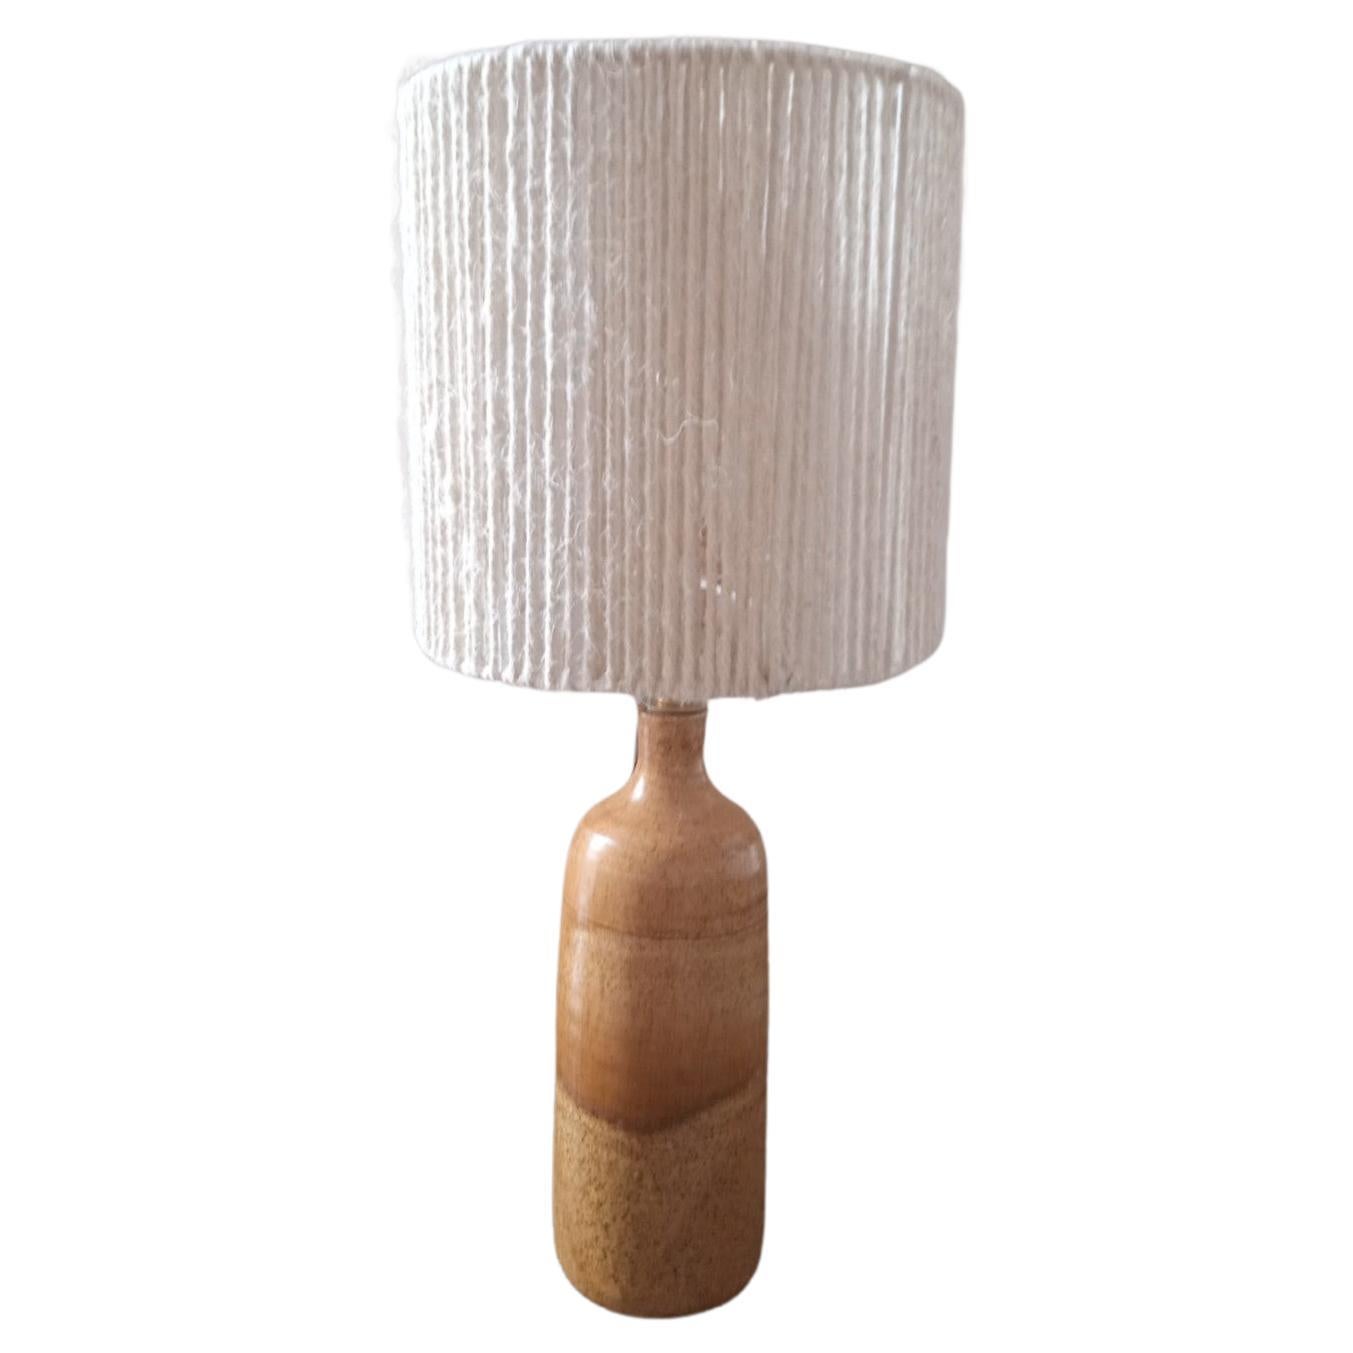 Mid-Centrury French Ceramic Table Lamp with Lampshade in Rope